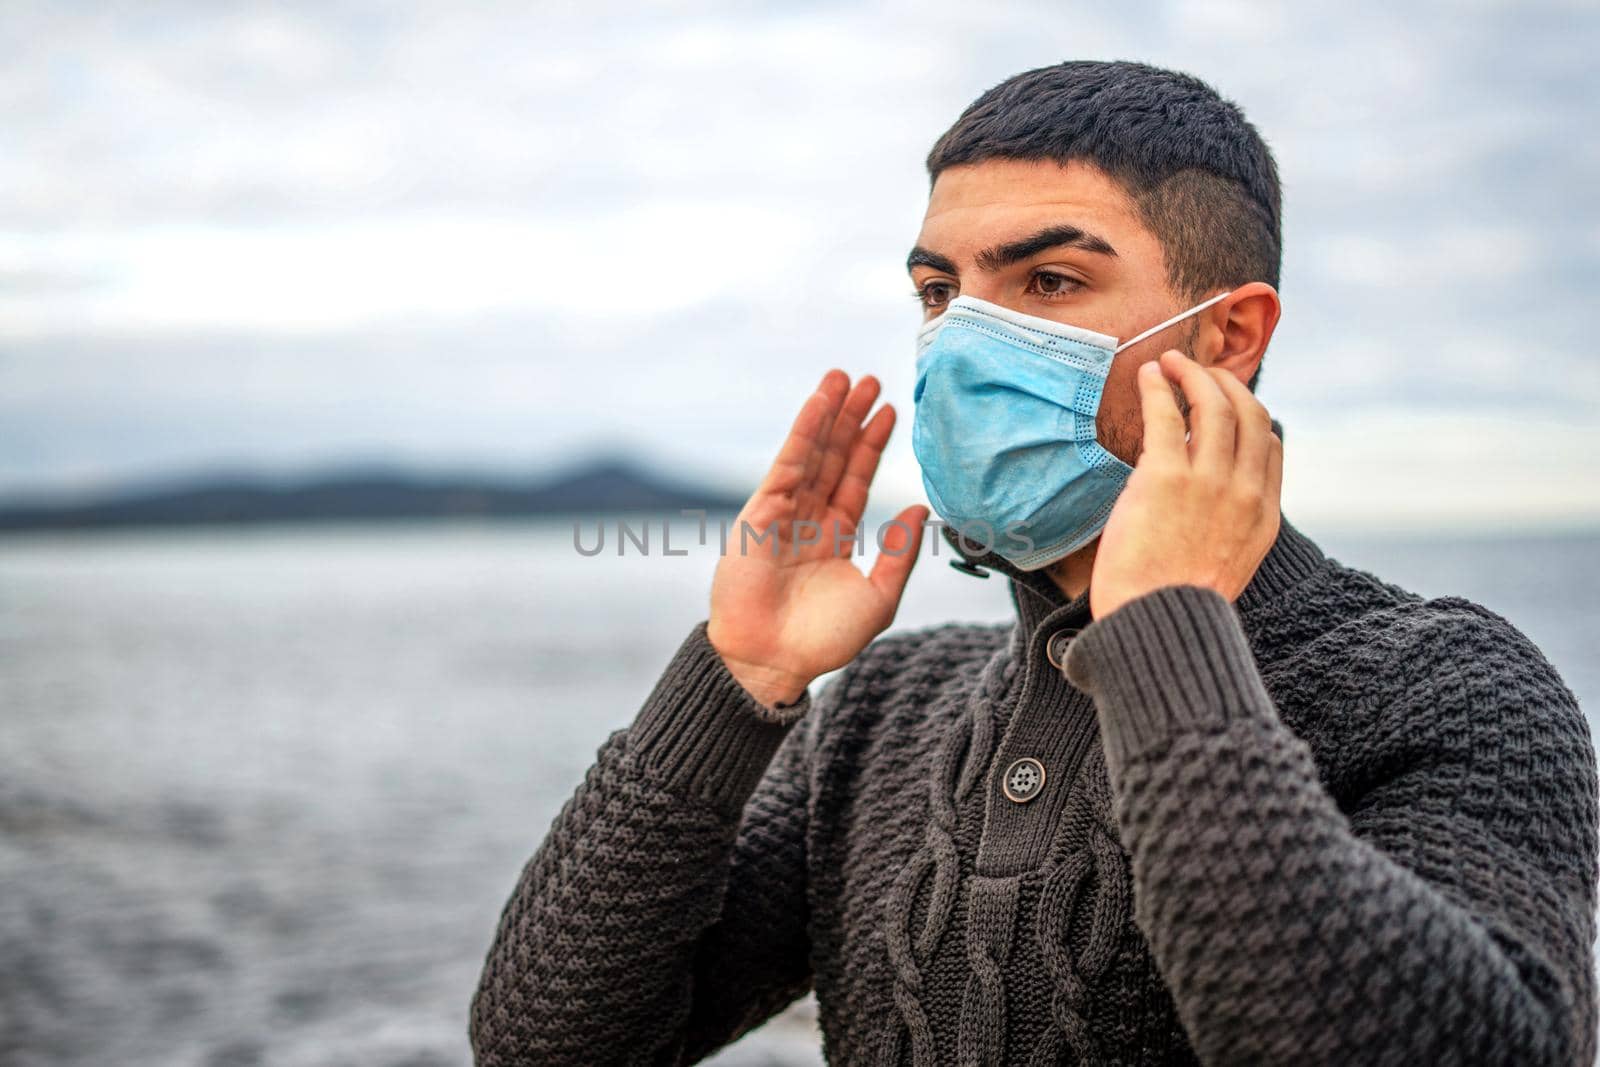 Handsome guy in dark wool sweater outdoor in sea resort has just worn face medical protection mask against Coronavirus pandemic virus - Young man living winter vacation with Covid-19 social disease by robbyfontanesi